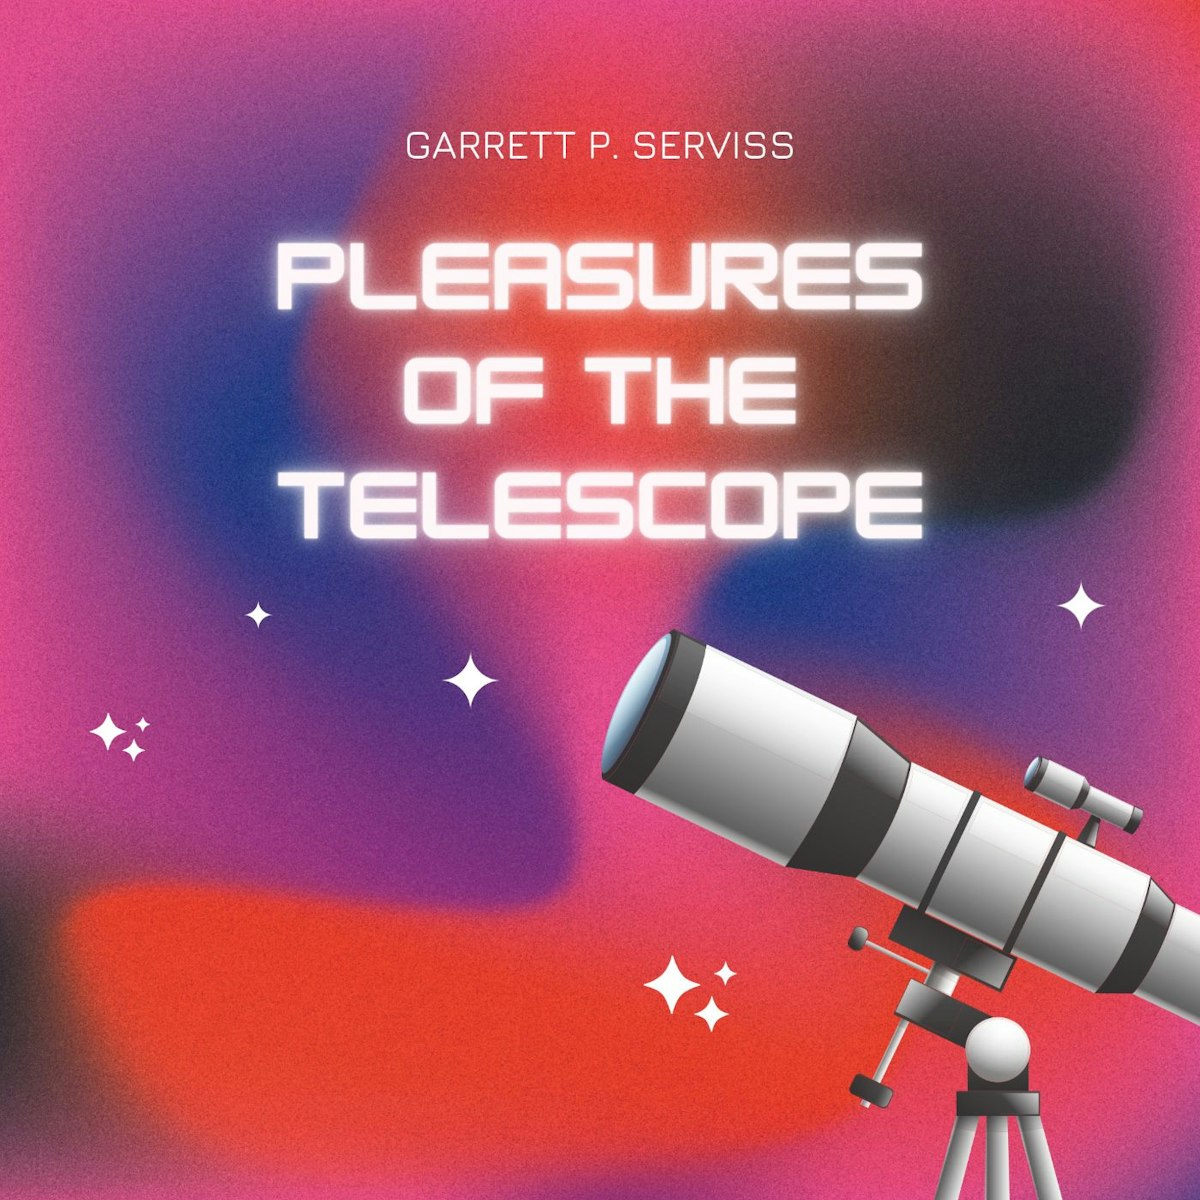 featured image - Pleasures of the telescope by Garrett Putman Serviss - Table of Links